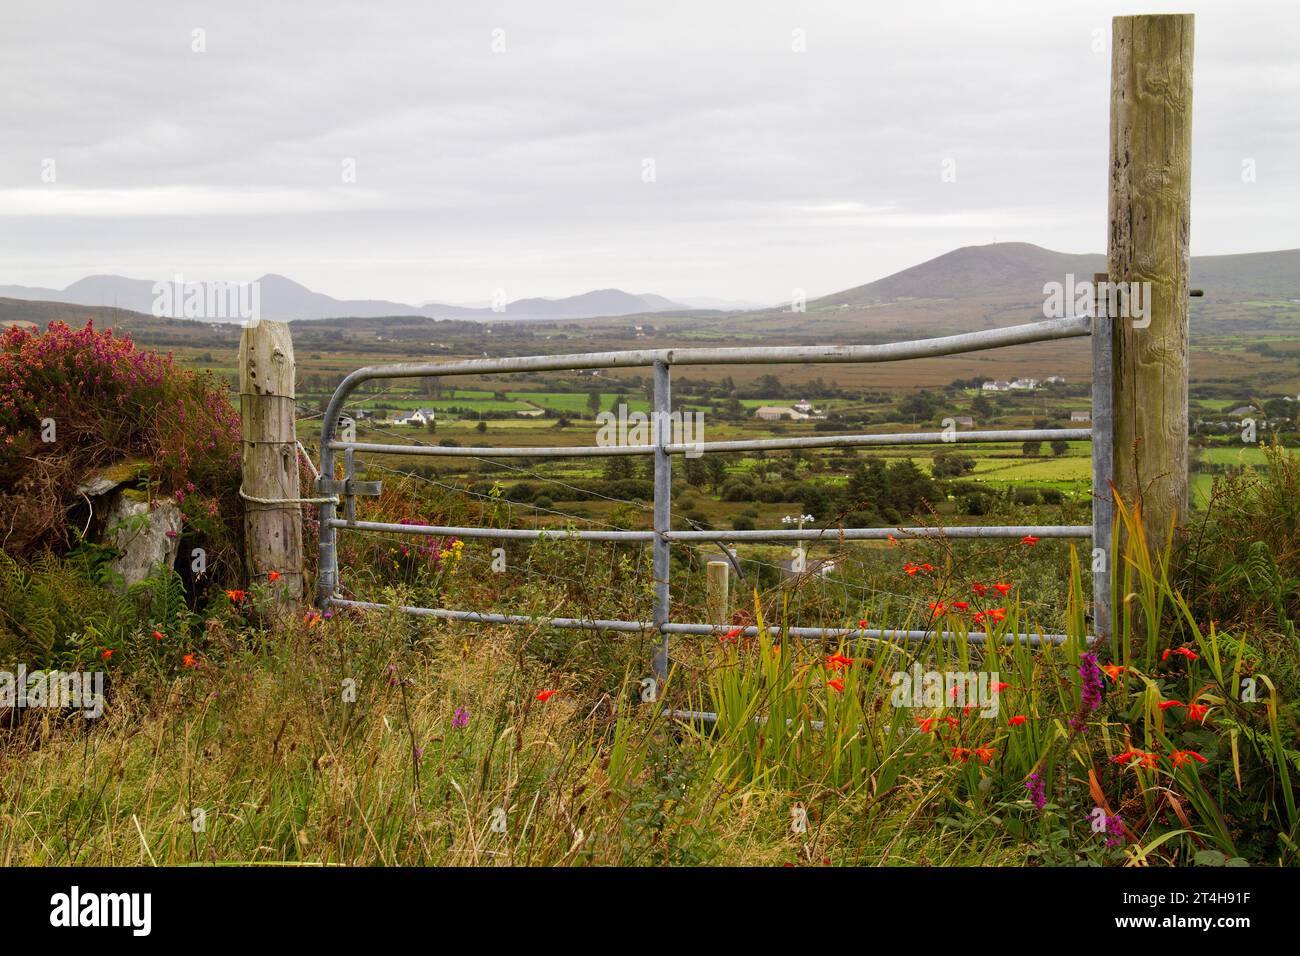 View through a closed galvanized metal gate on a beautiful hilly Irish landscape with lots of wildflowers Stock Photo